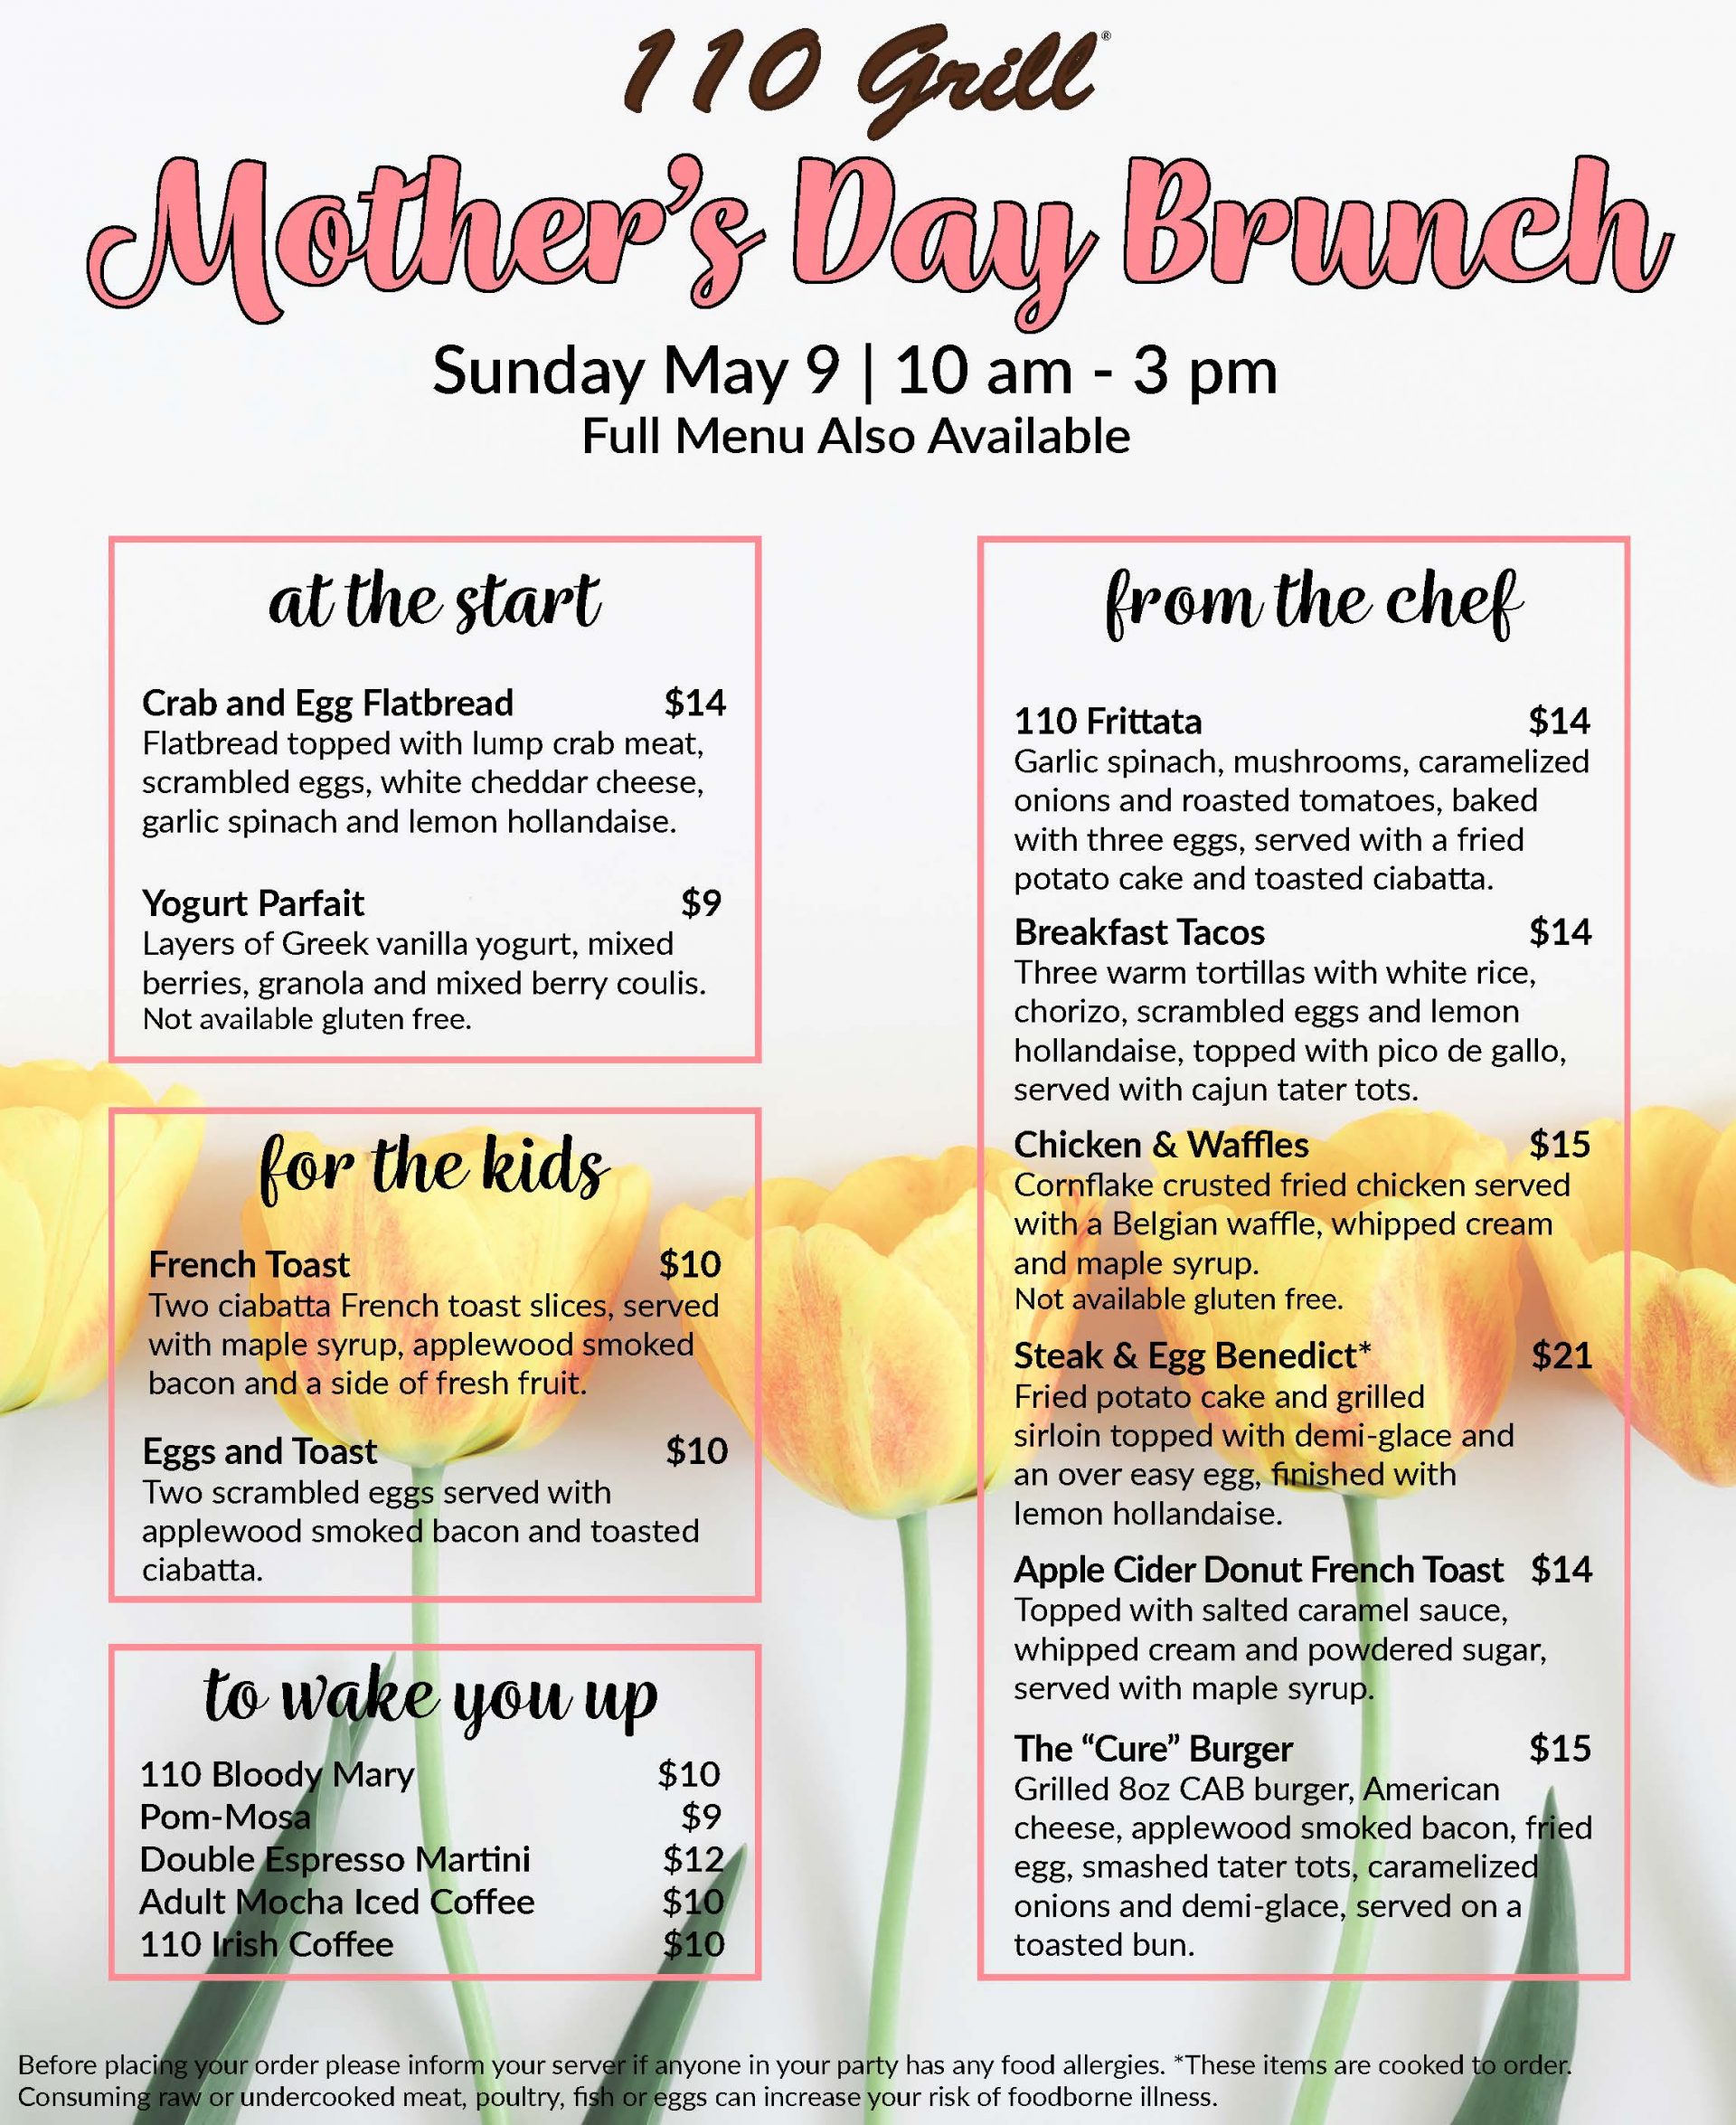 Celebrate Mother's Day with Brunch at 110 Grill! Crossgates